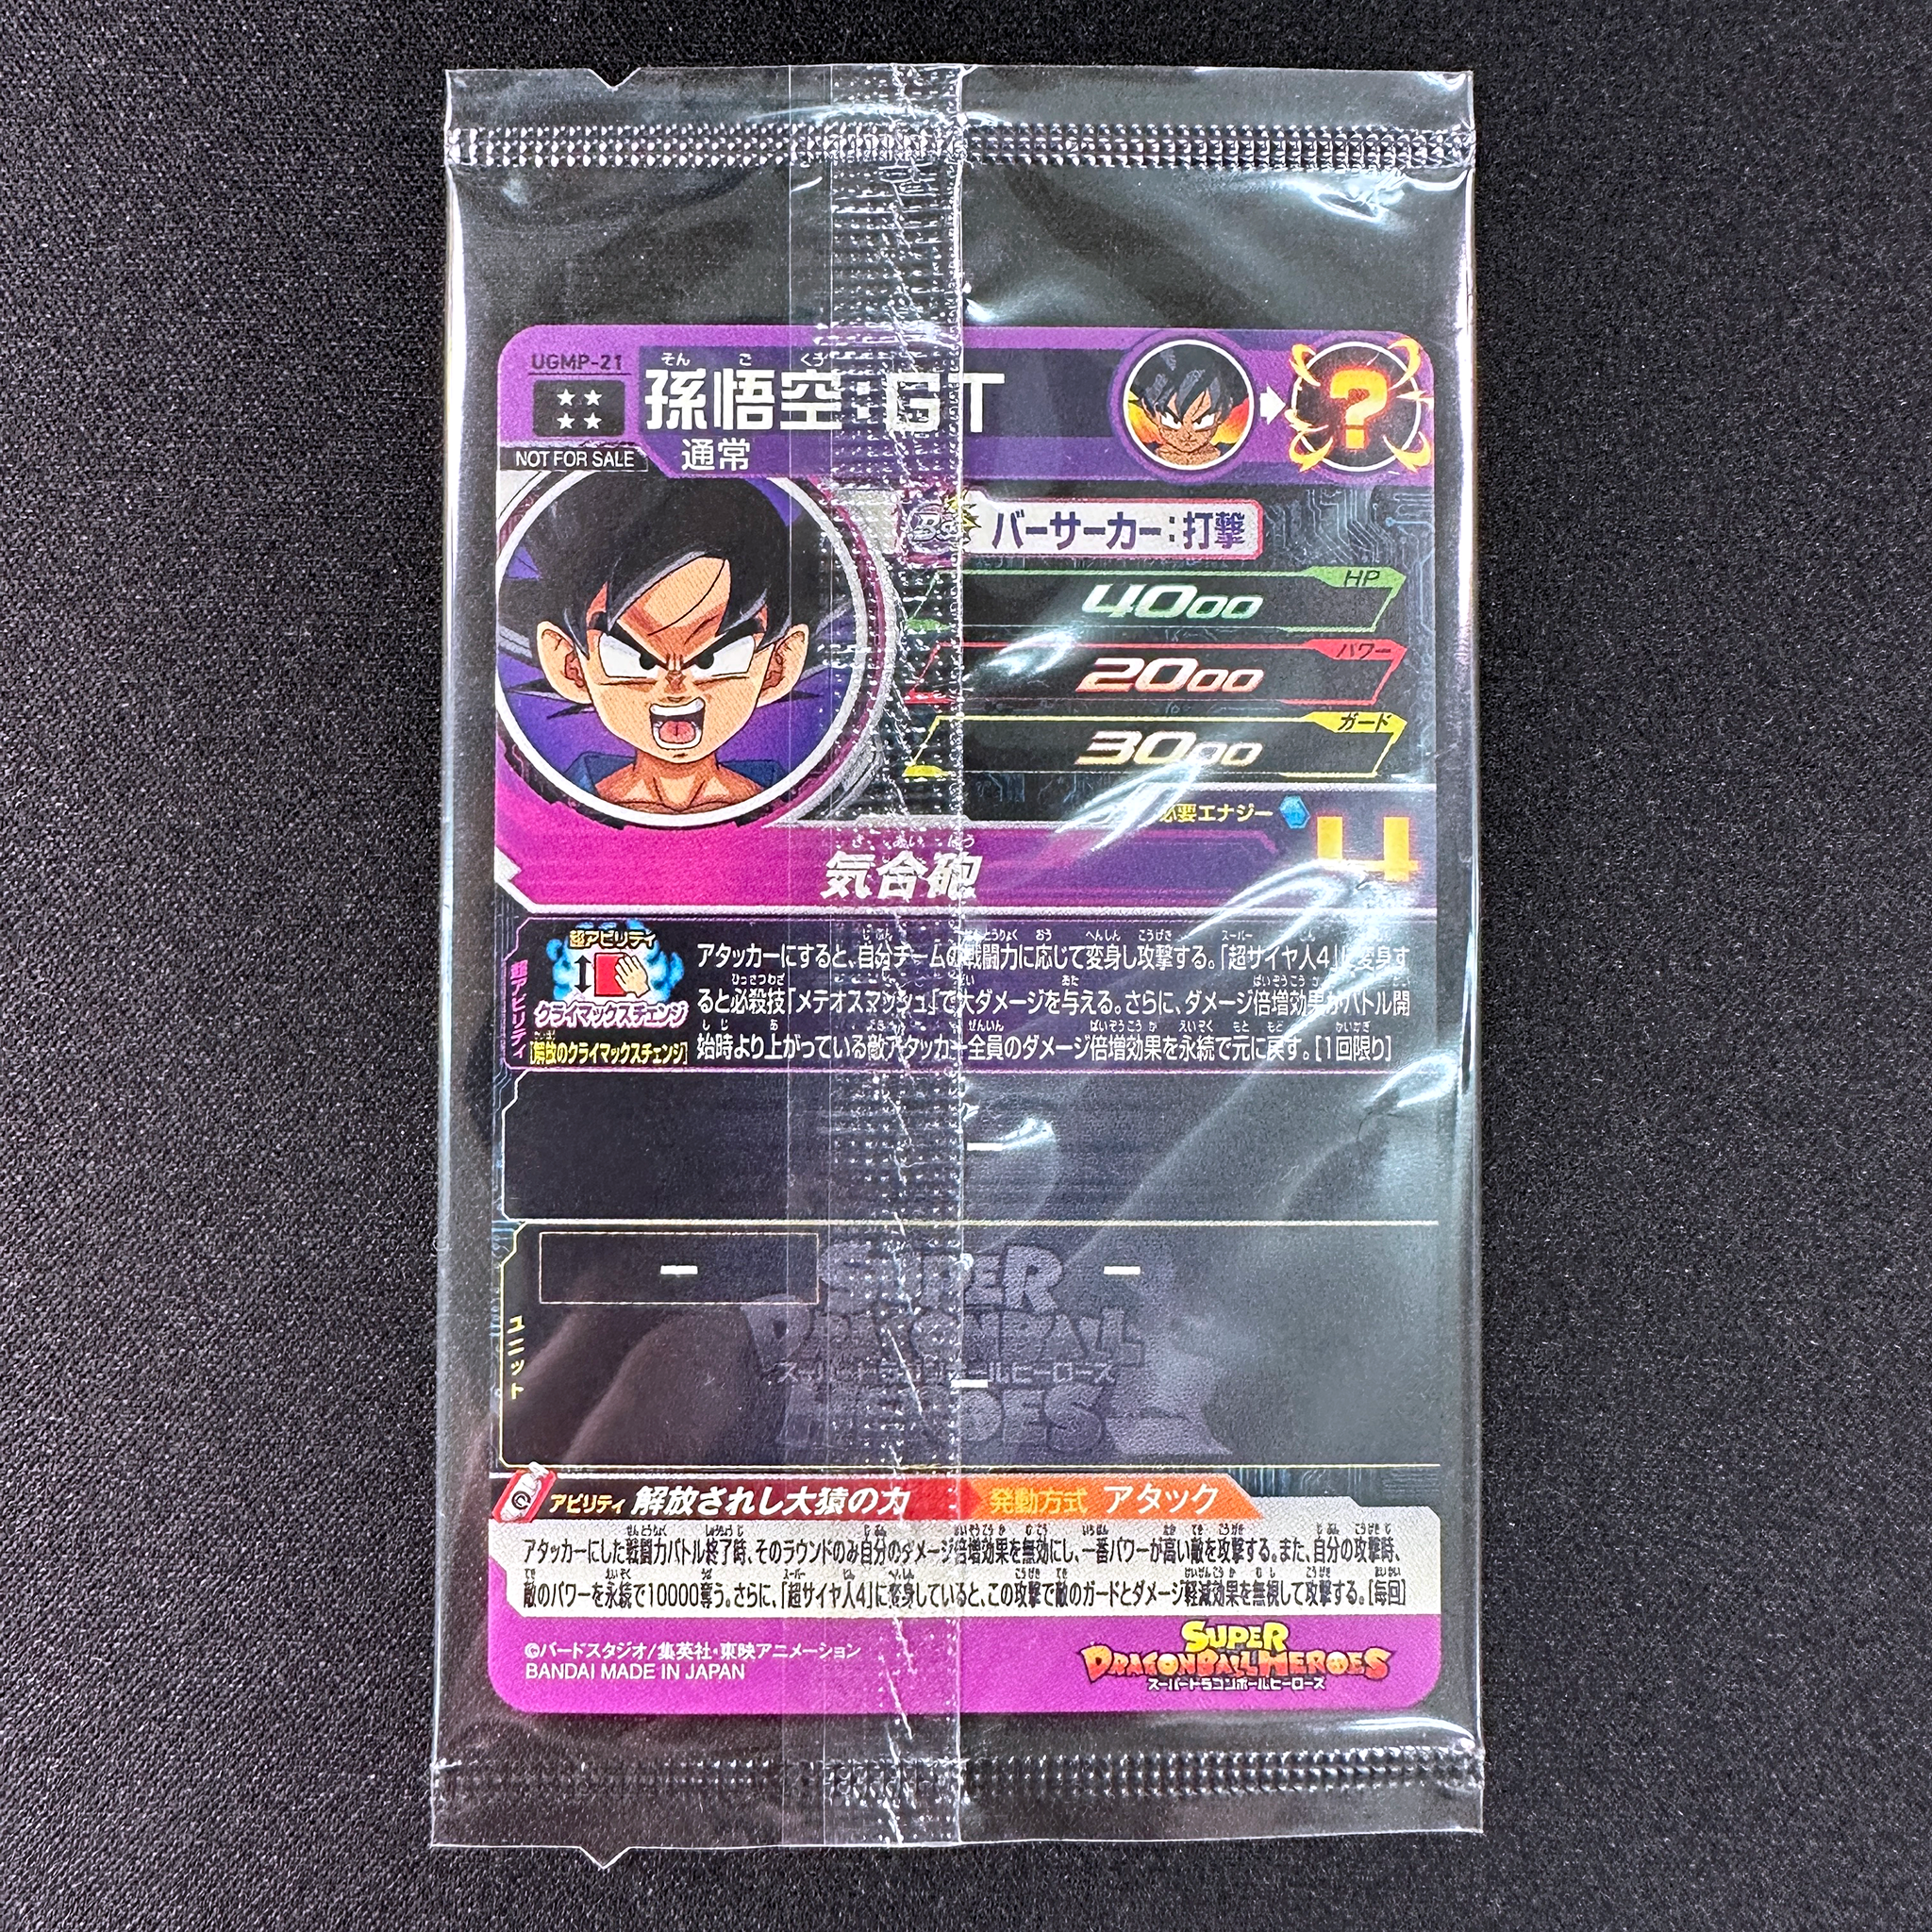 SUPER DRAGON BALL HEROES UGMP-21 in blister Promotional card  Release date: January 12 2023  Son Goku : GT SSJ4